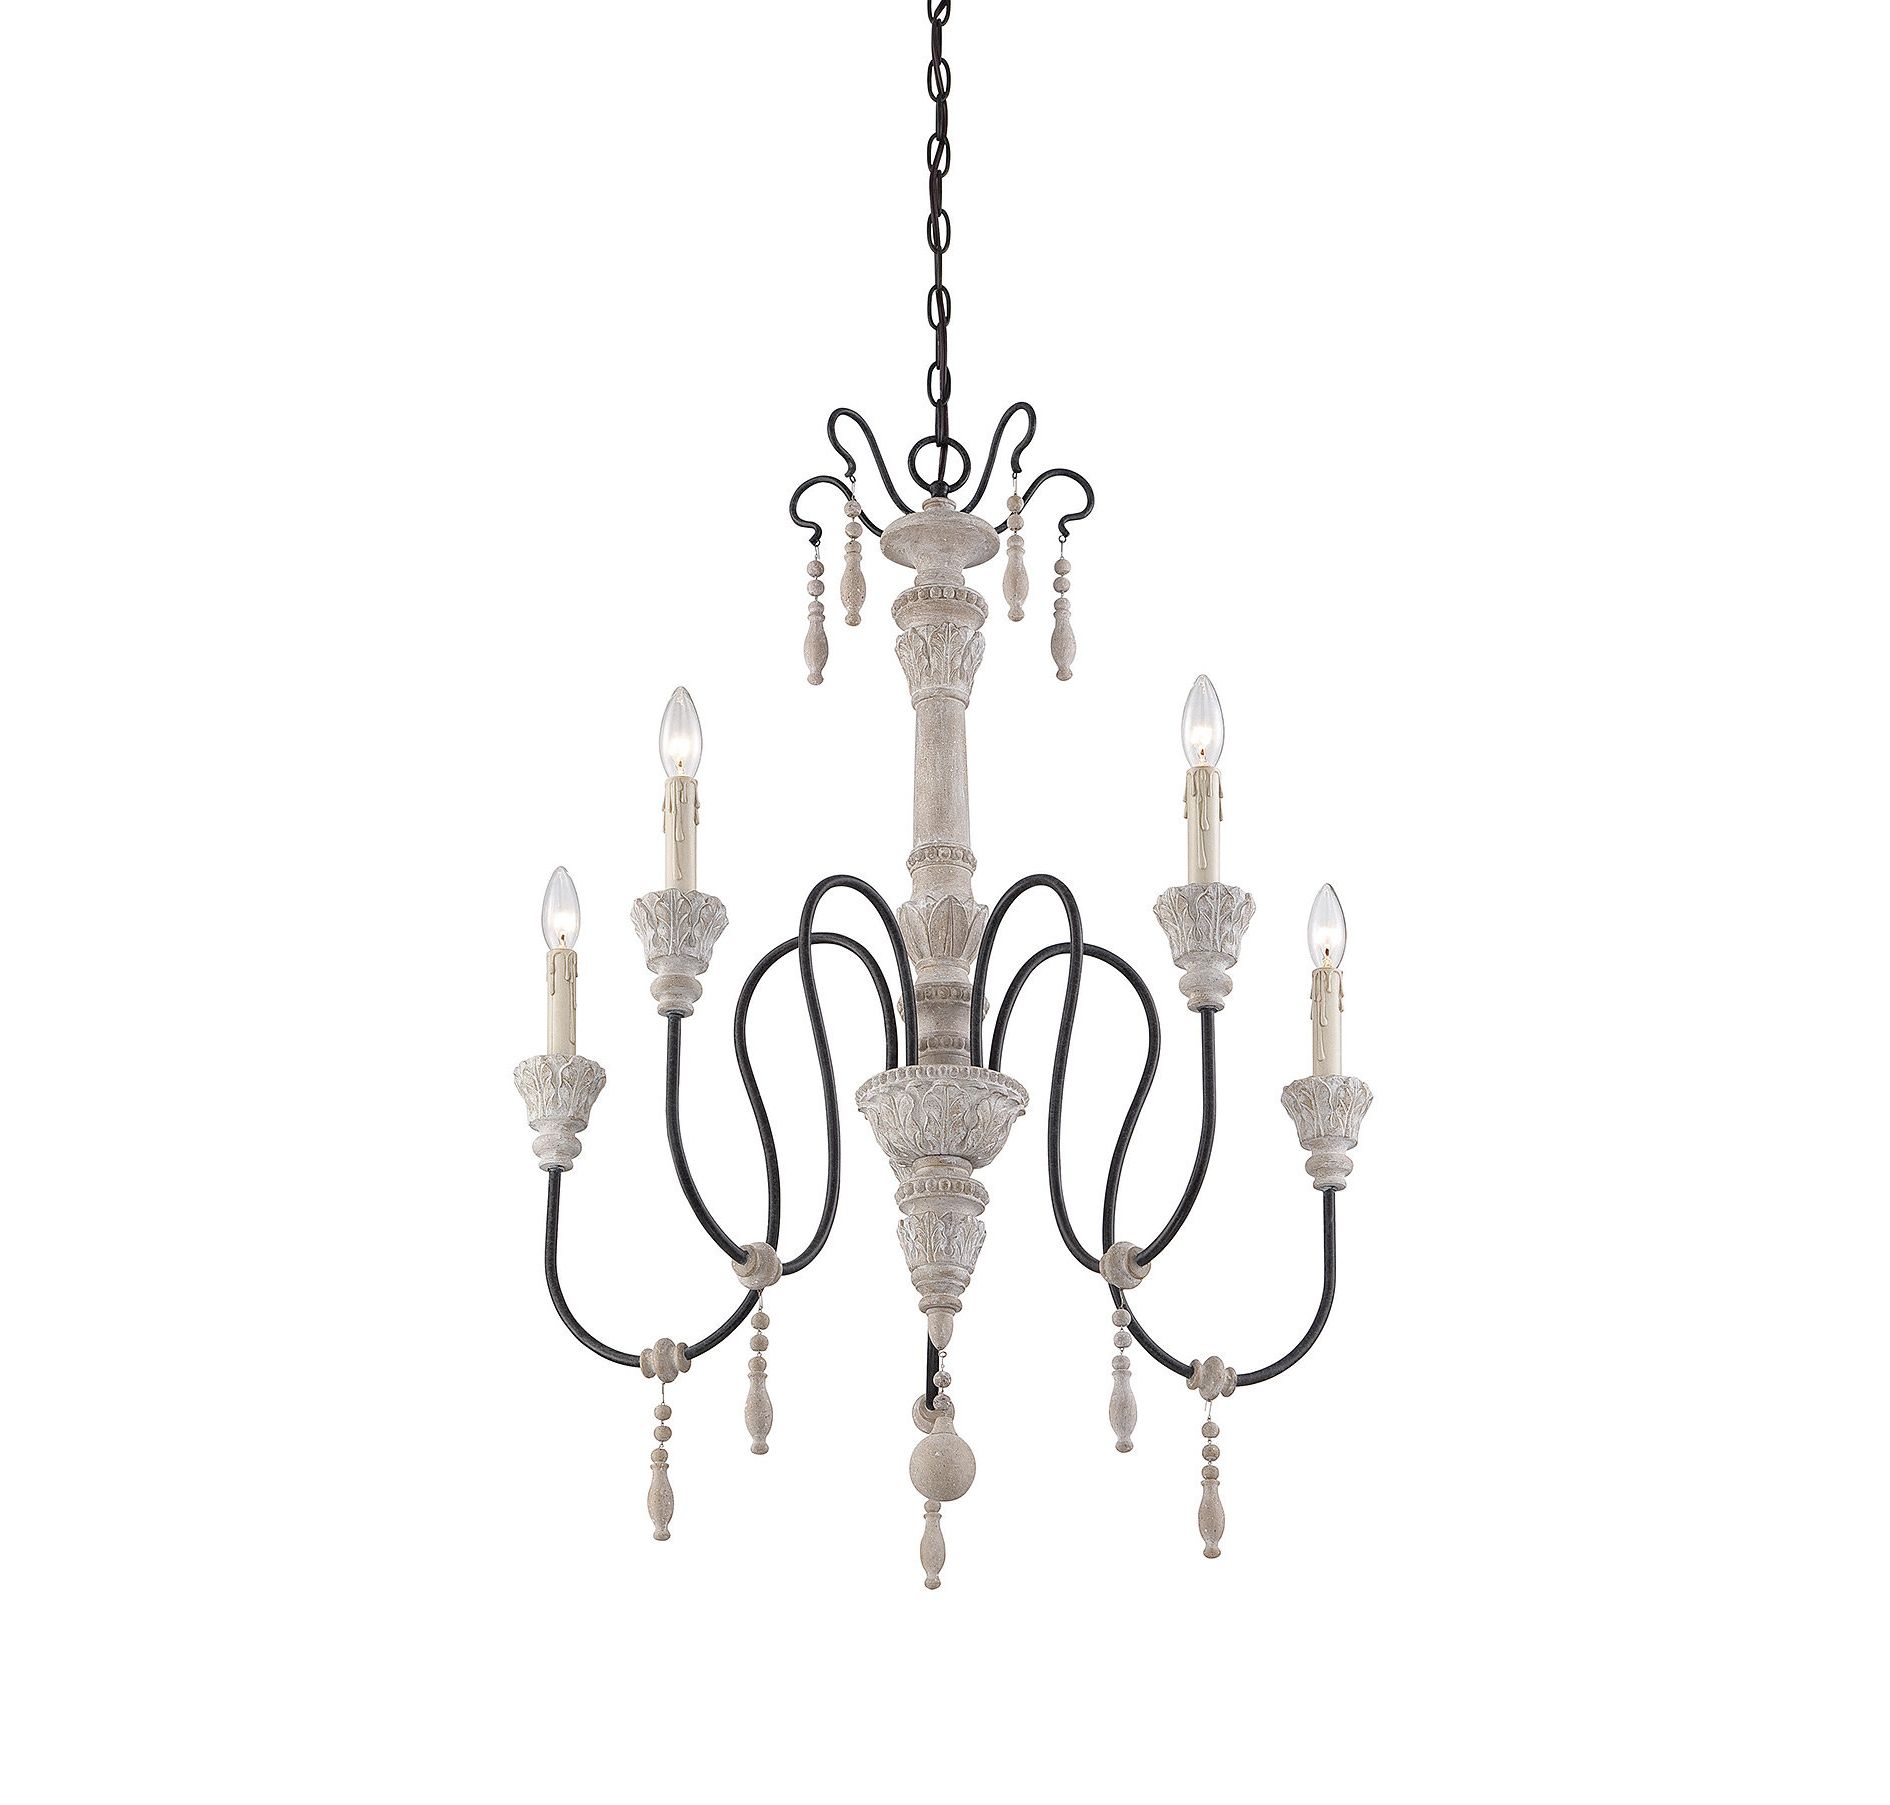 Widely Used Paladino 6 Light Chandeliers Inside Corneau 5 Light Chandelier (View 8 of 25)